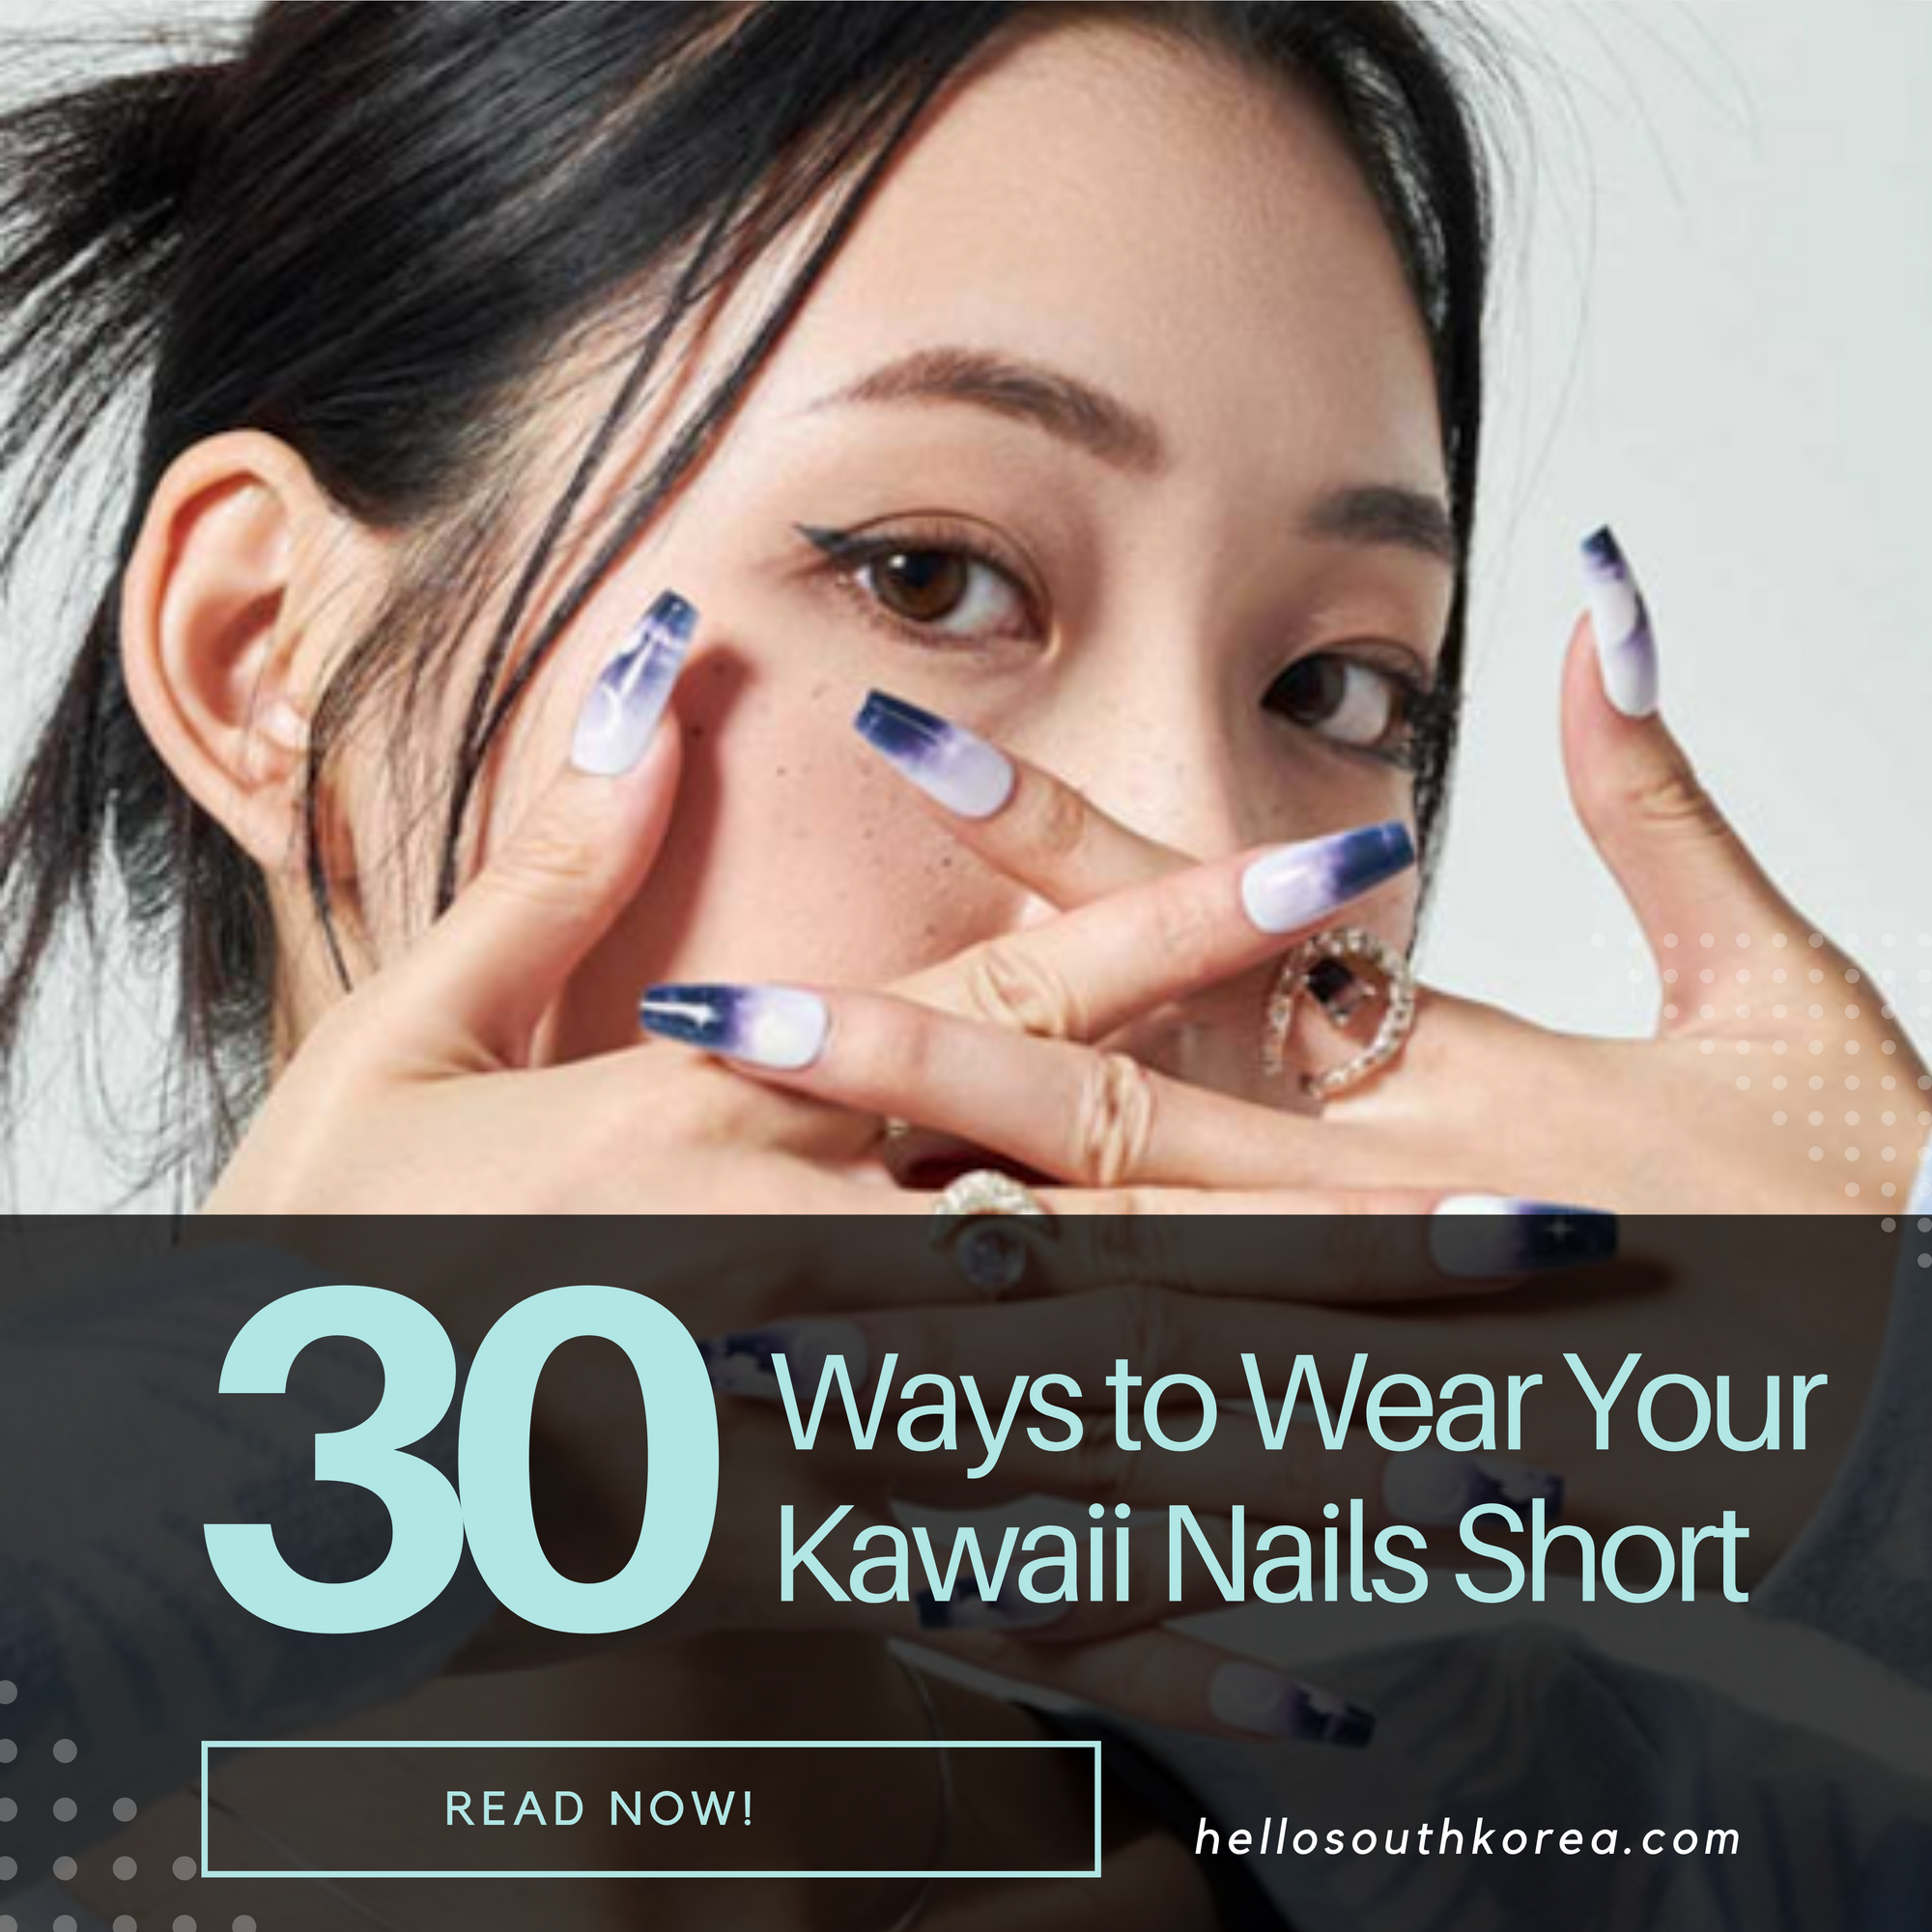 30+ Ways to Wear Your Kawaii Nails Short And Cute